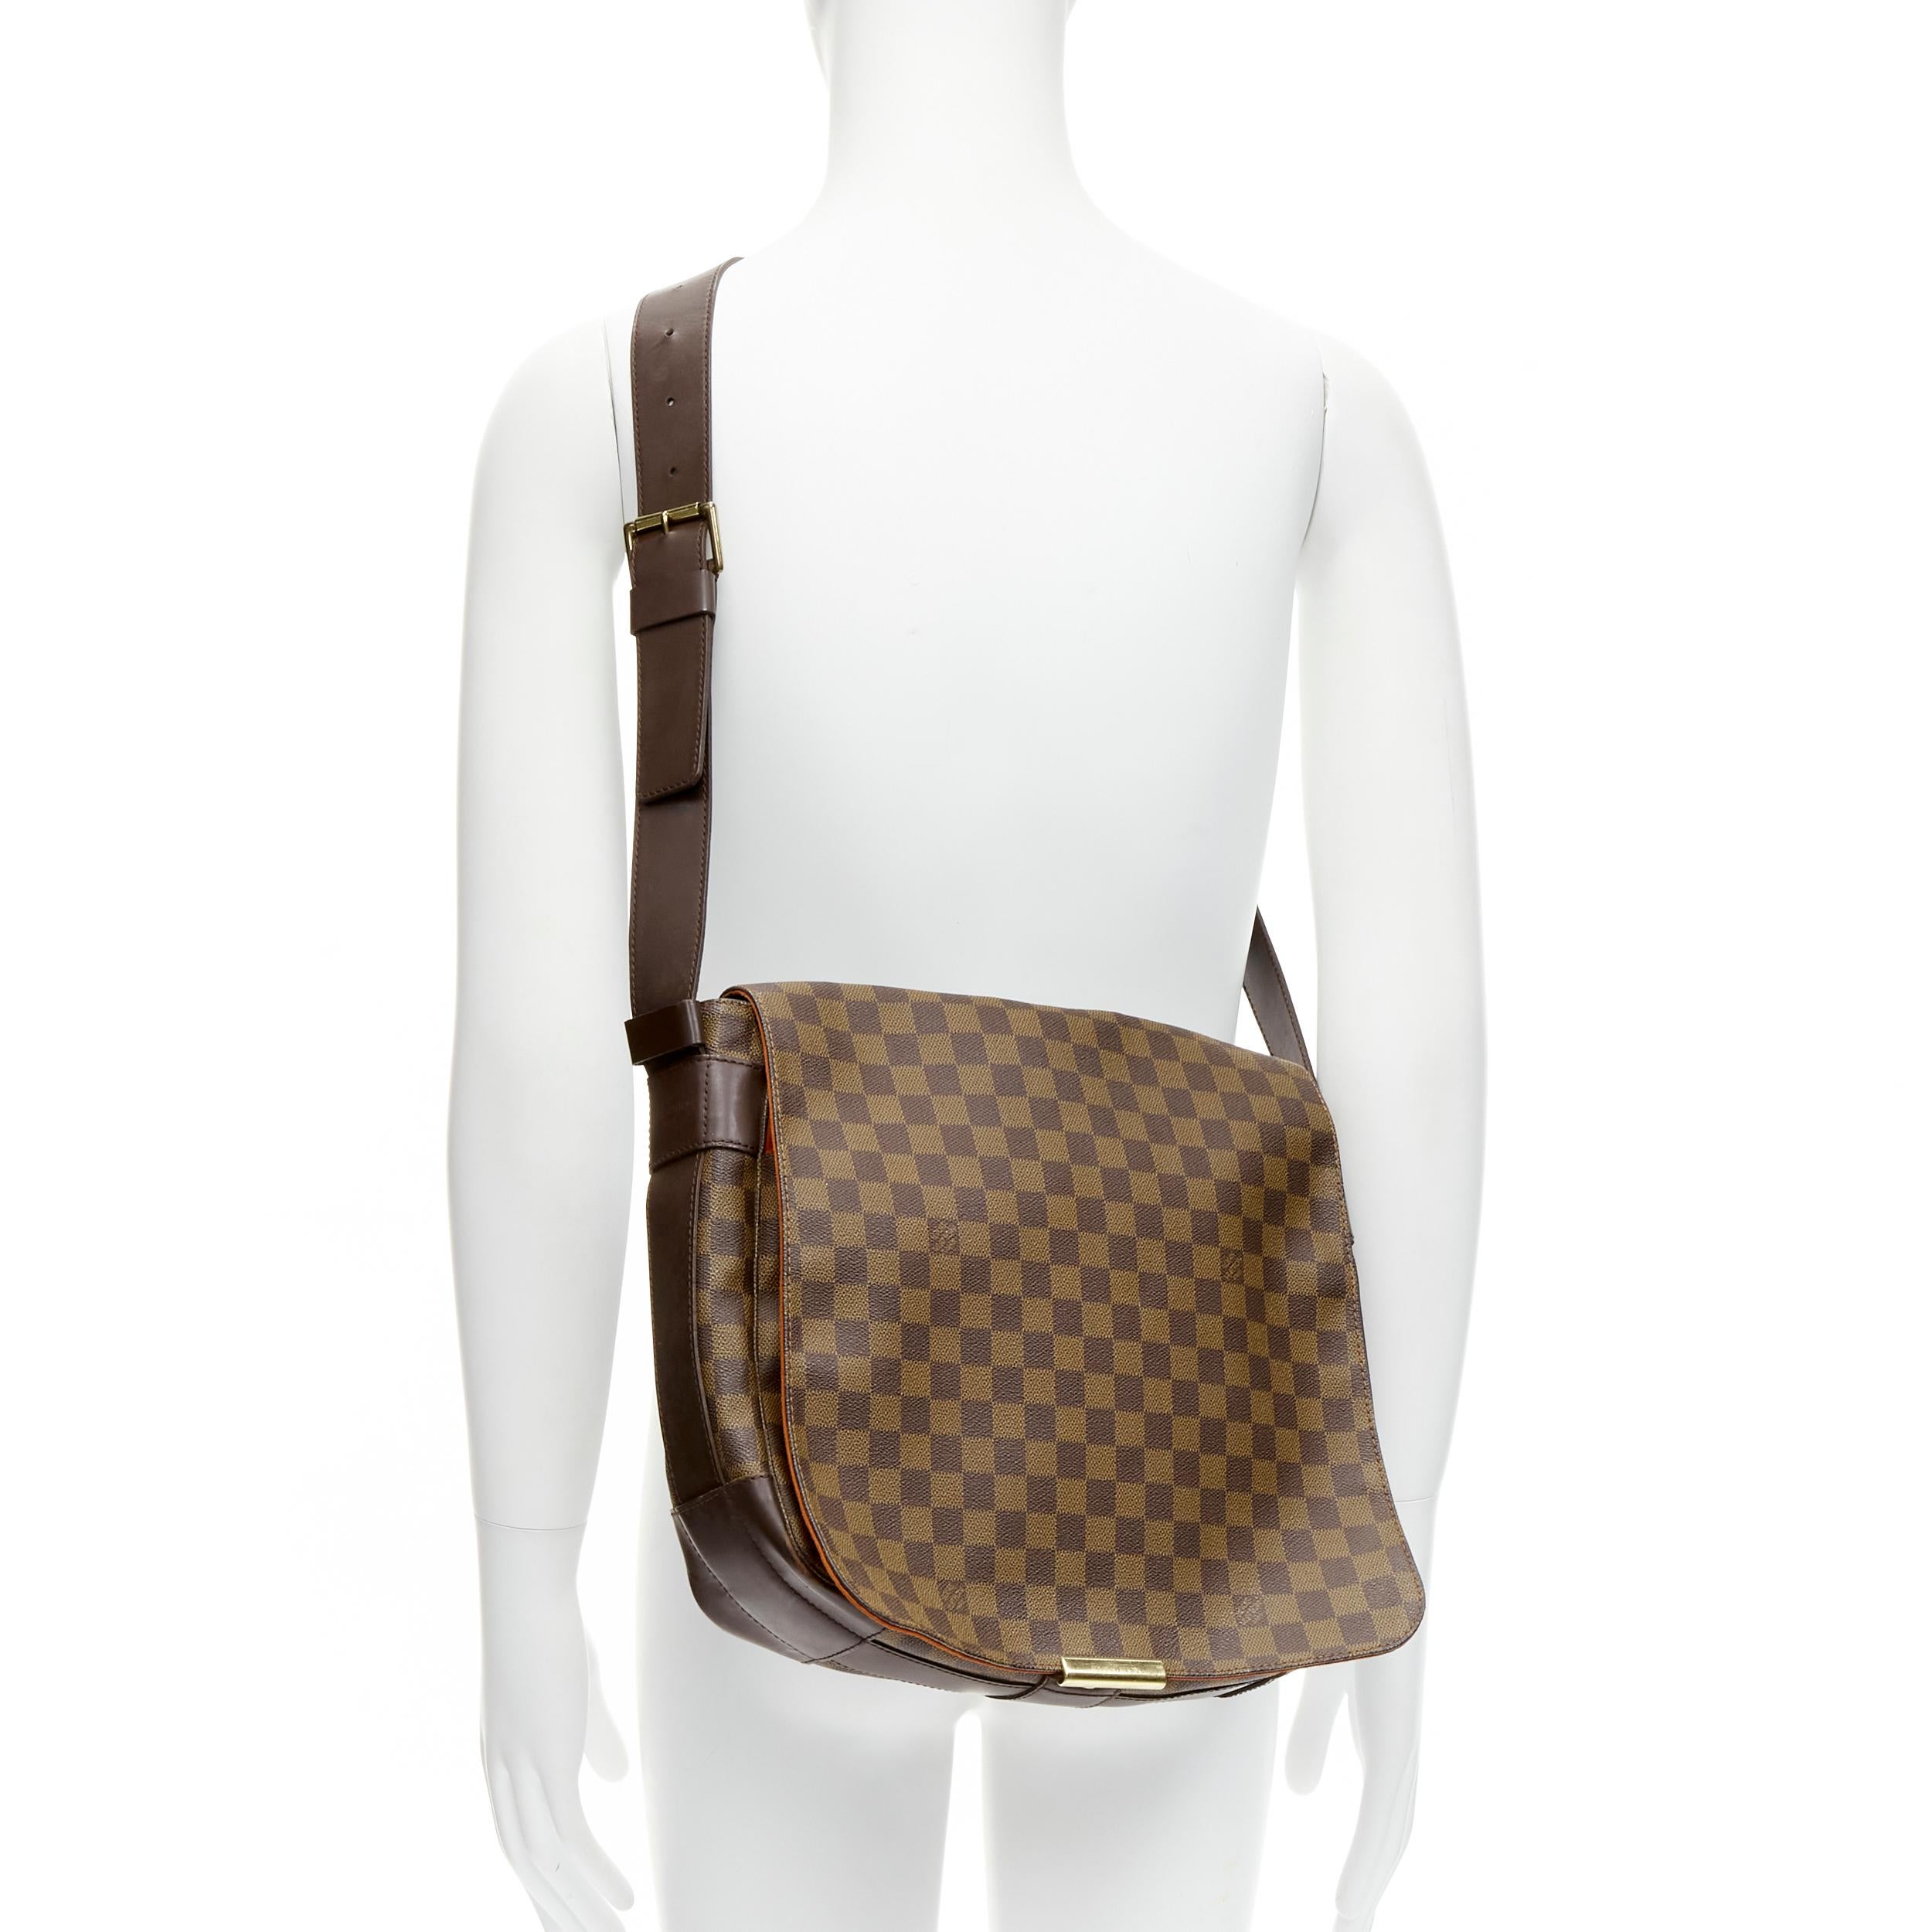 LOUIS VUITTON Bastille Ebene brown Damier LV logo canvas messenger crossbody bag
Reference: TGAS/C01570
Brand: Louis Vuitton
Model: Bastille
Material: Canvas, Leather
Color: Brown
Pattern: Checkered
Closure: Elasticated
Lining: Fabric
Extra Details: